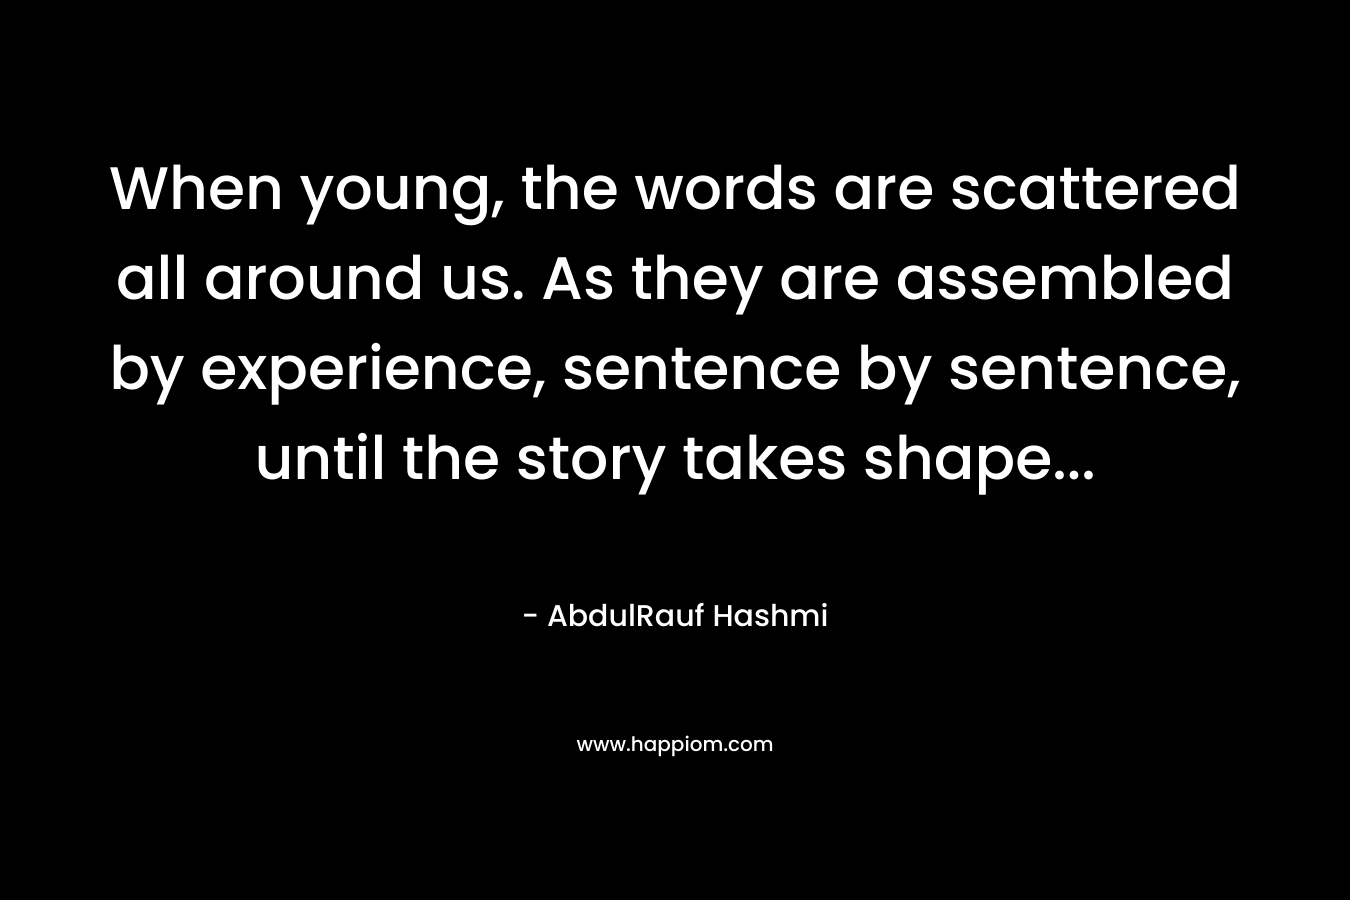 When young, the words are scattered all around us. As they are assembled by experience, sentence by sentence, until the story takes shape… – AbdulRauf Hashmi